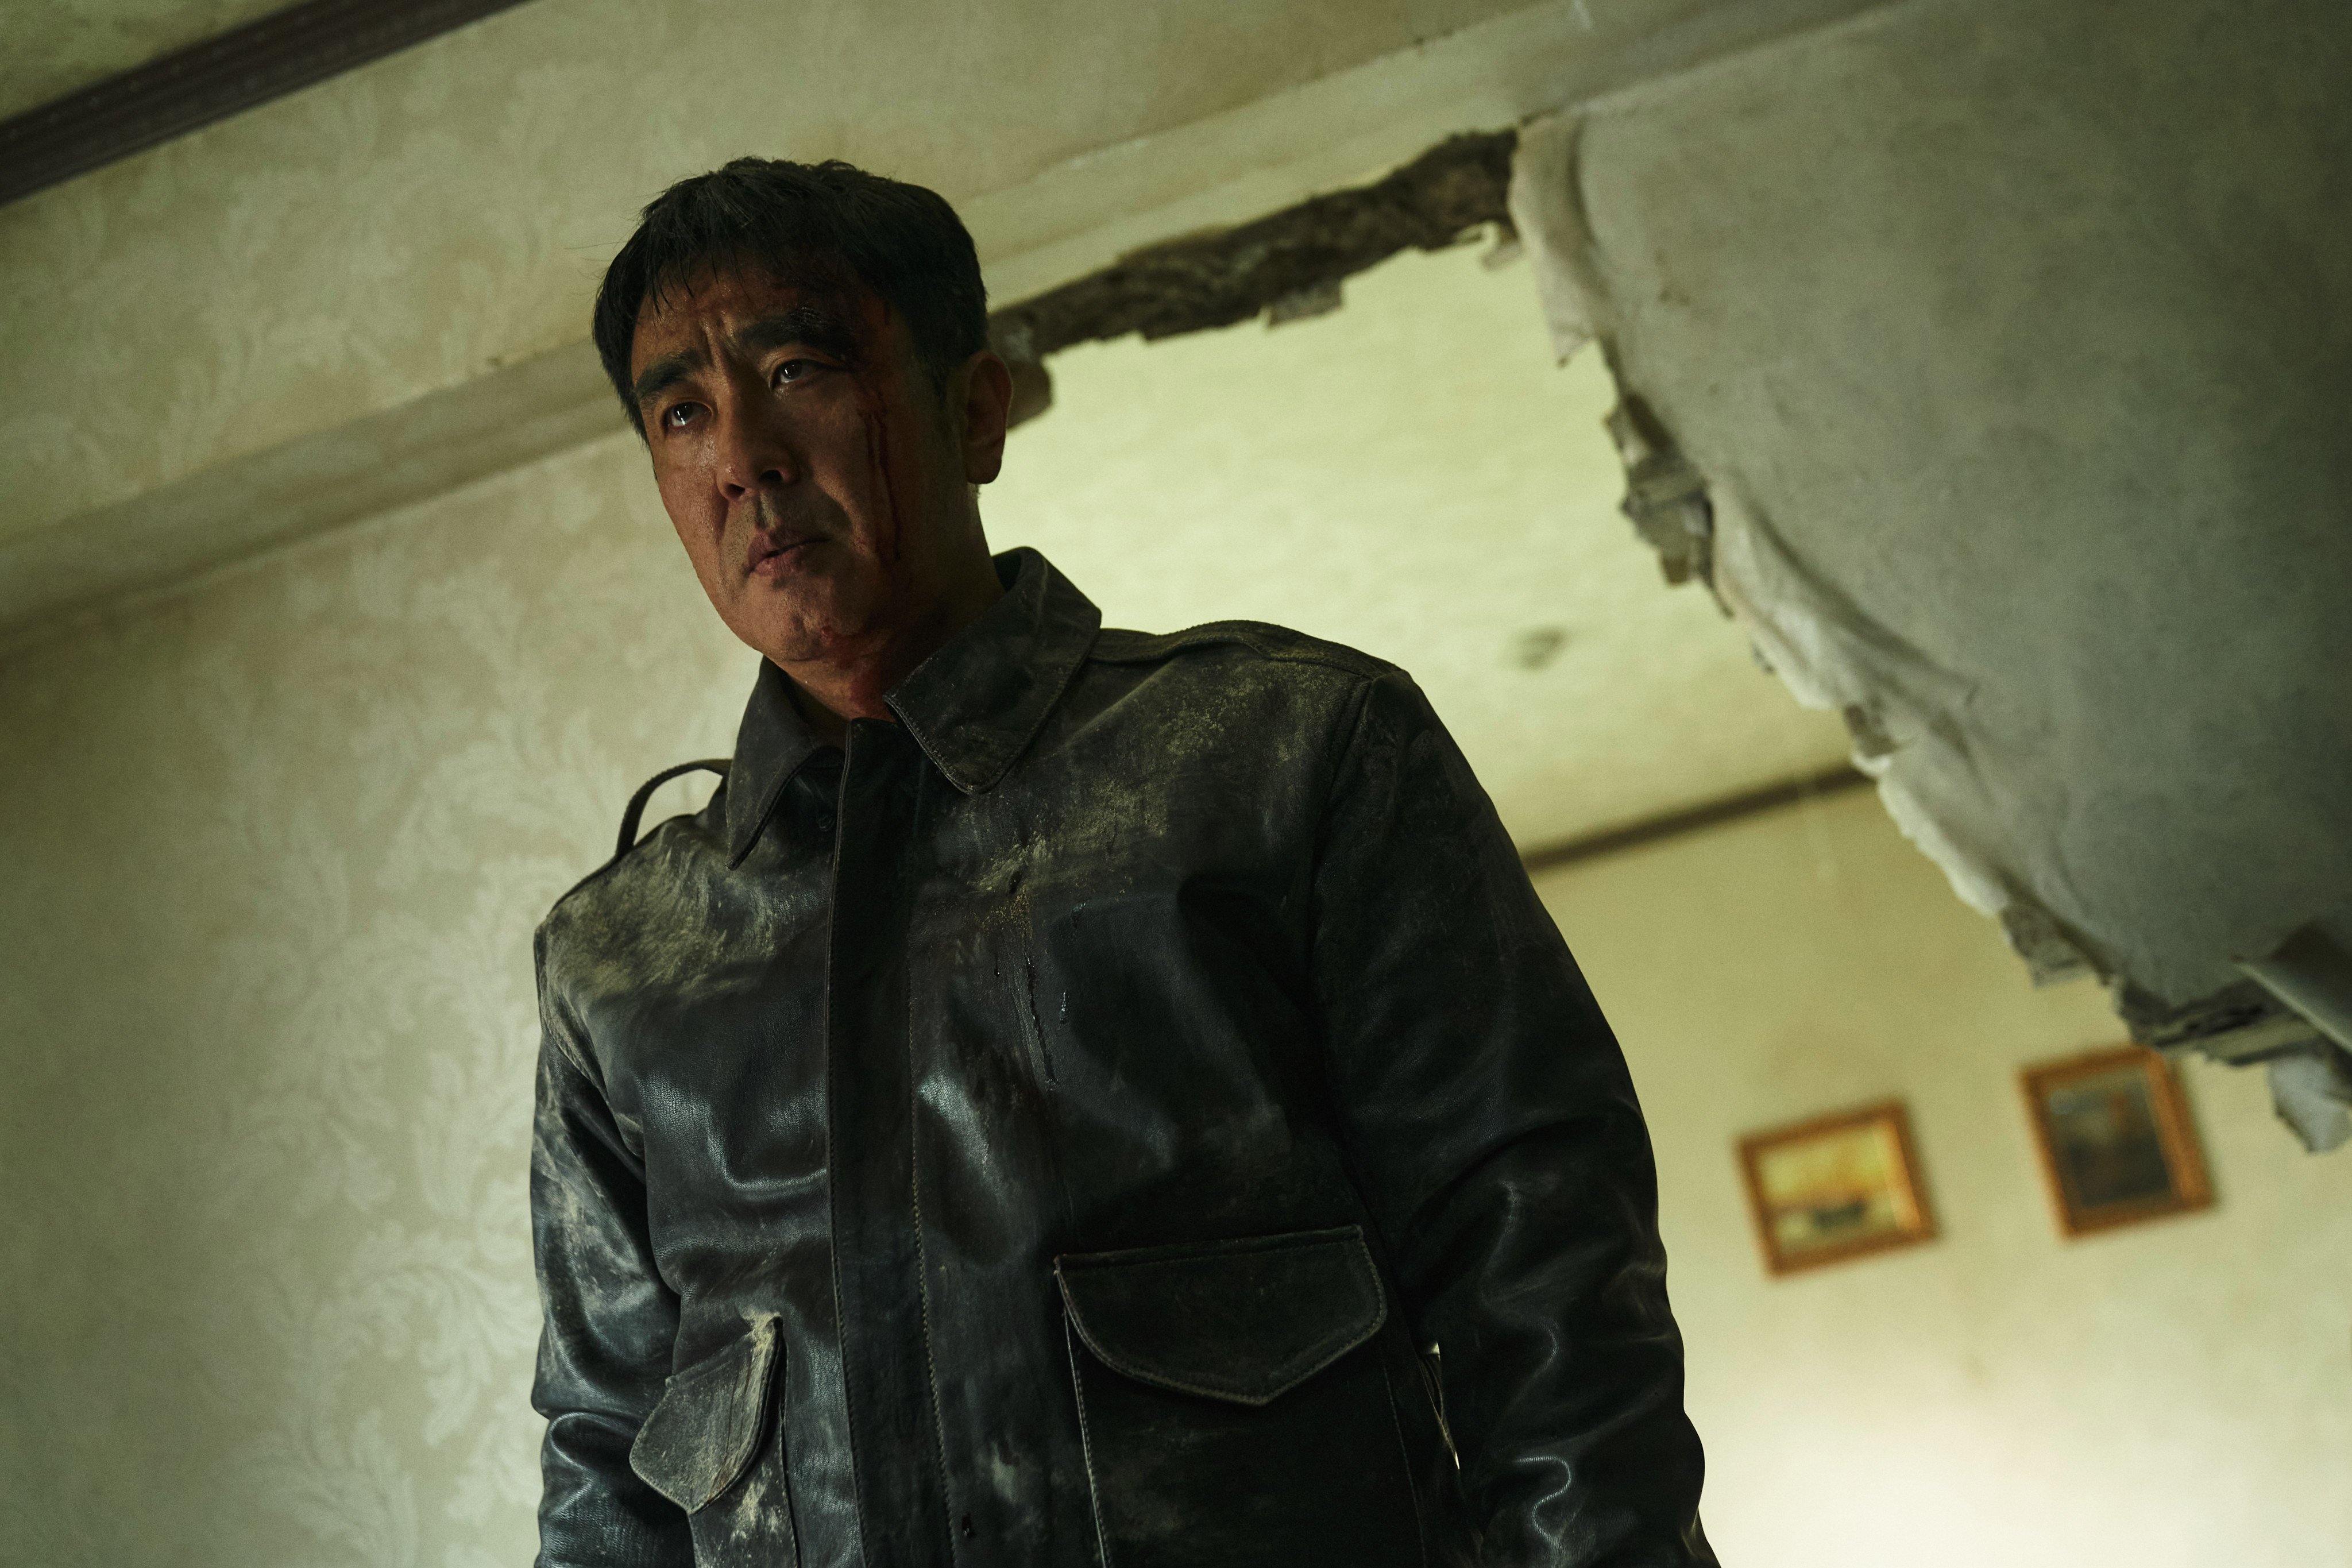 Ryoo Seung-ryong in a still from “Moving”.